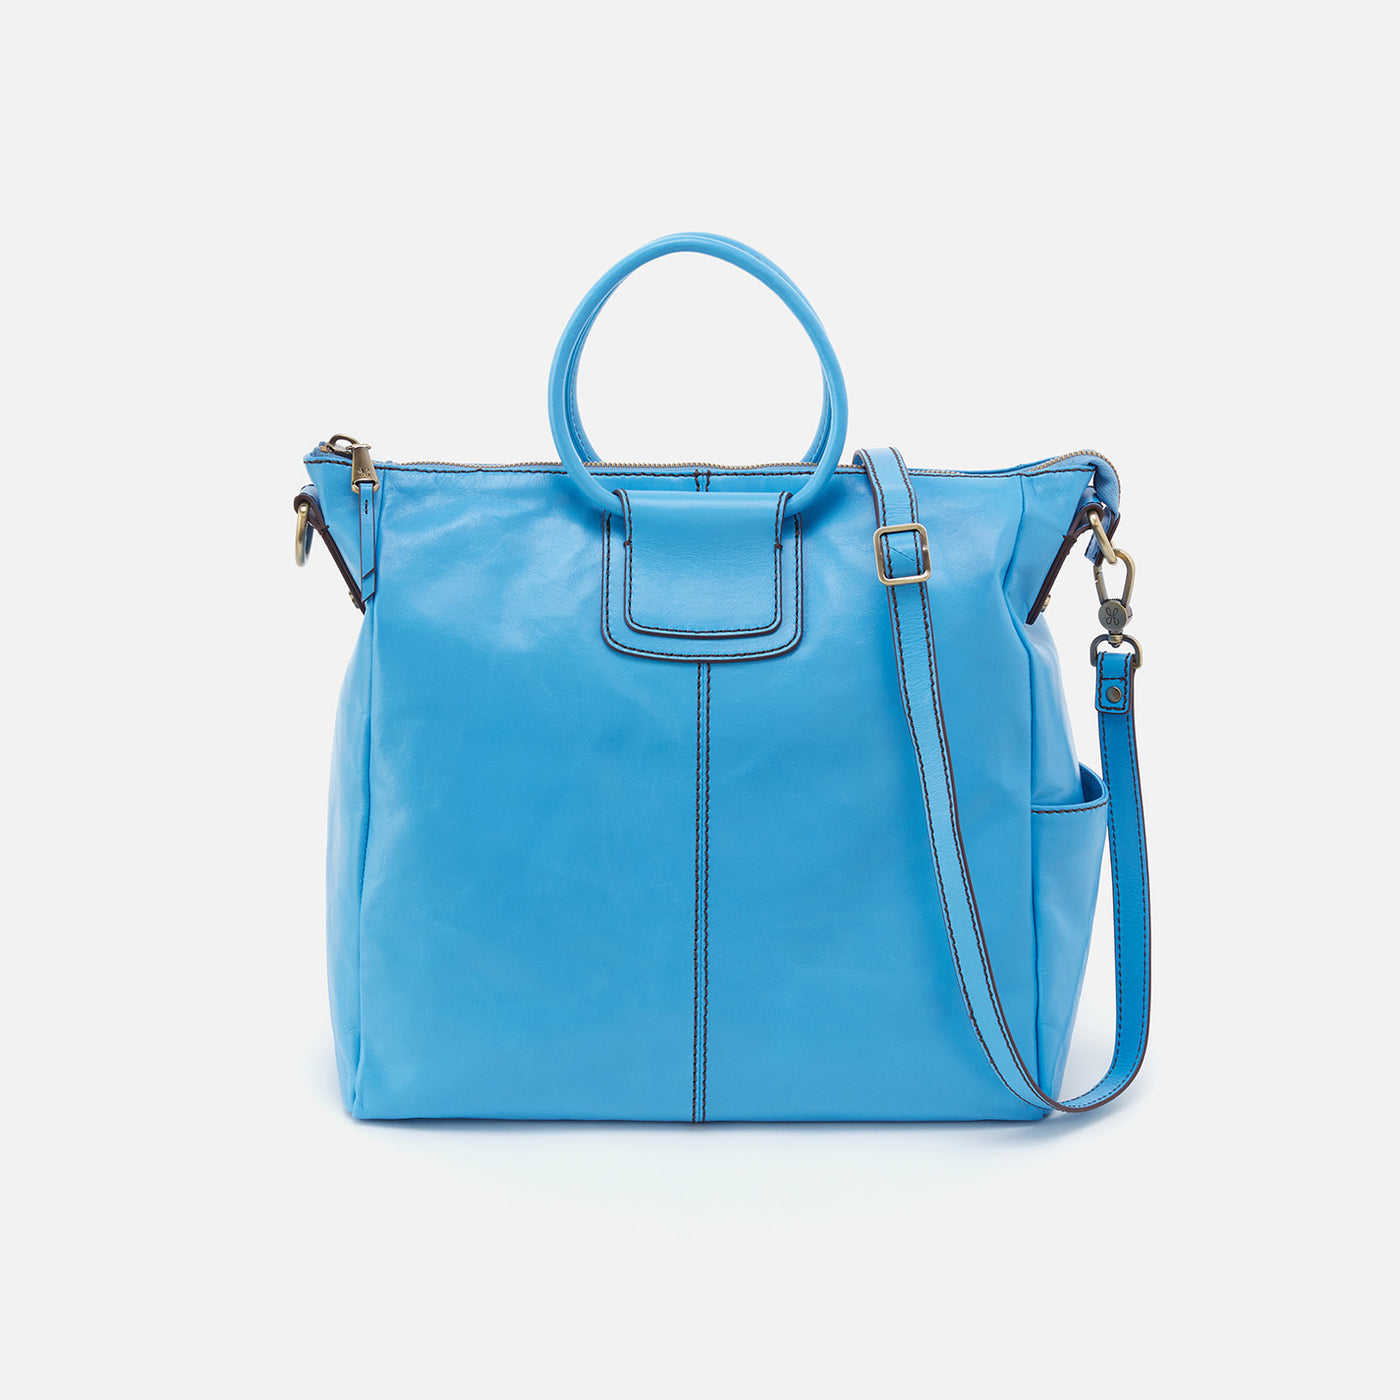 Sheila Large Satchel in Polished Leather - Tranquil Blue